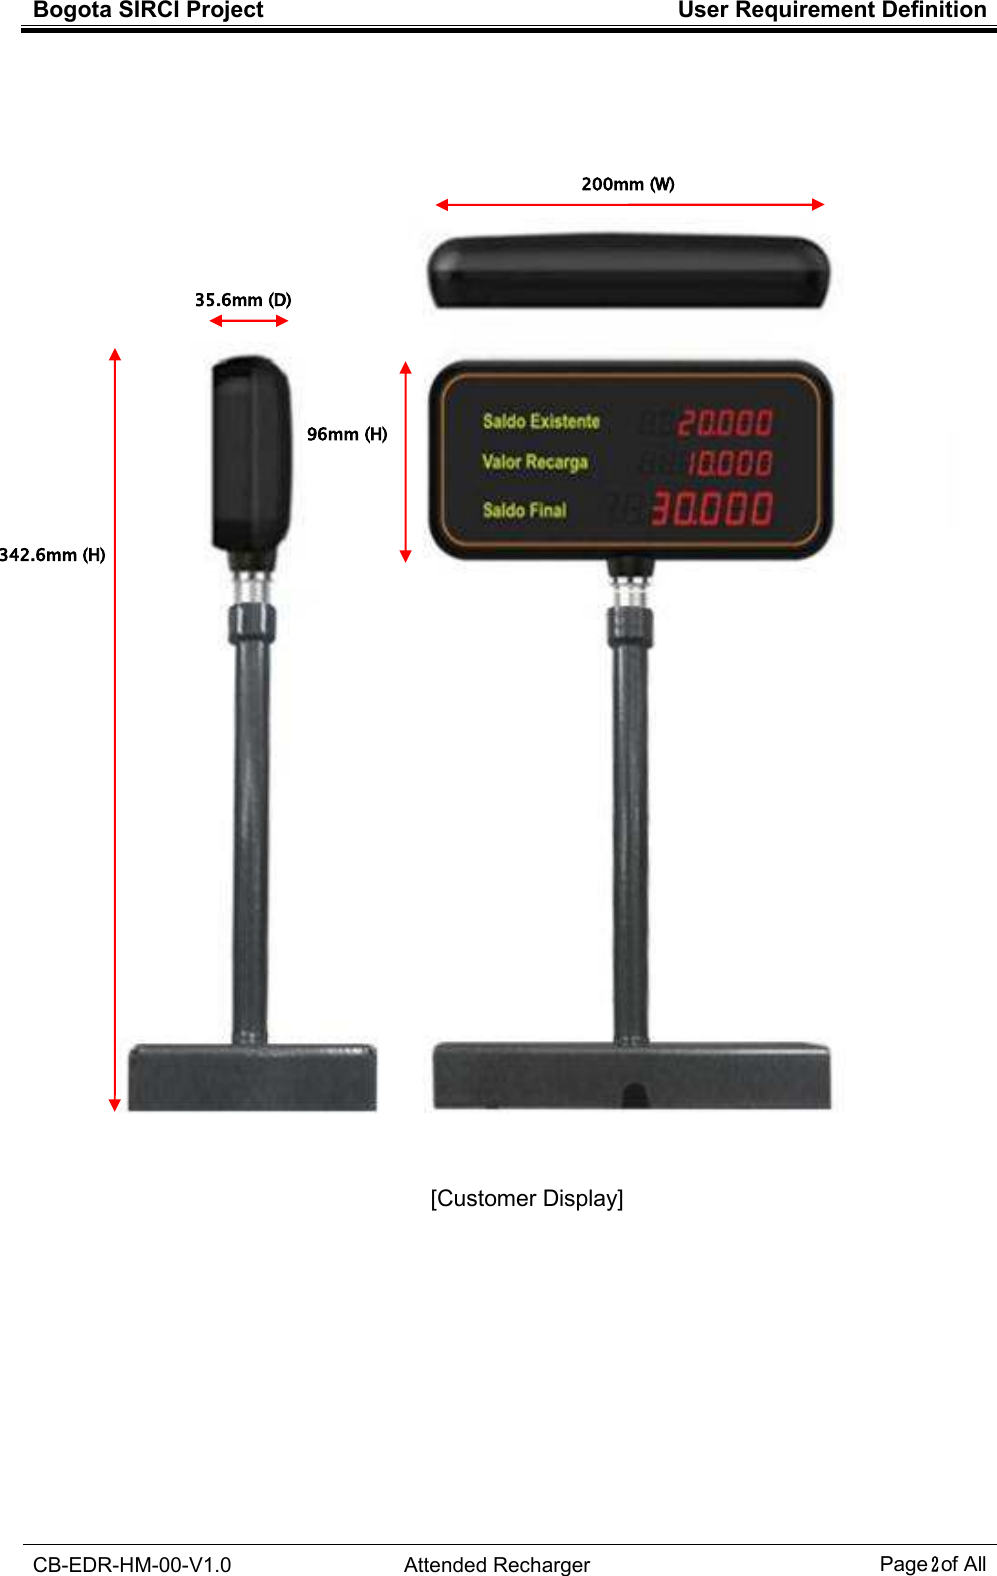 Bogota SIRCI Project  User Requirement Definition  CB-EDR-HM-00-V1.0  Attended Recharger Page２ of All                   [Customer Display]   200mm (W) 35.6mm (D) 96mm (H) 342.6mm (H) 